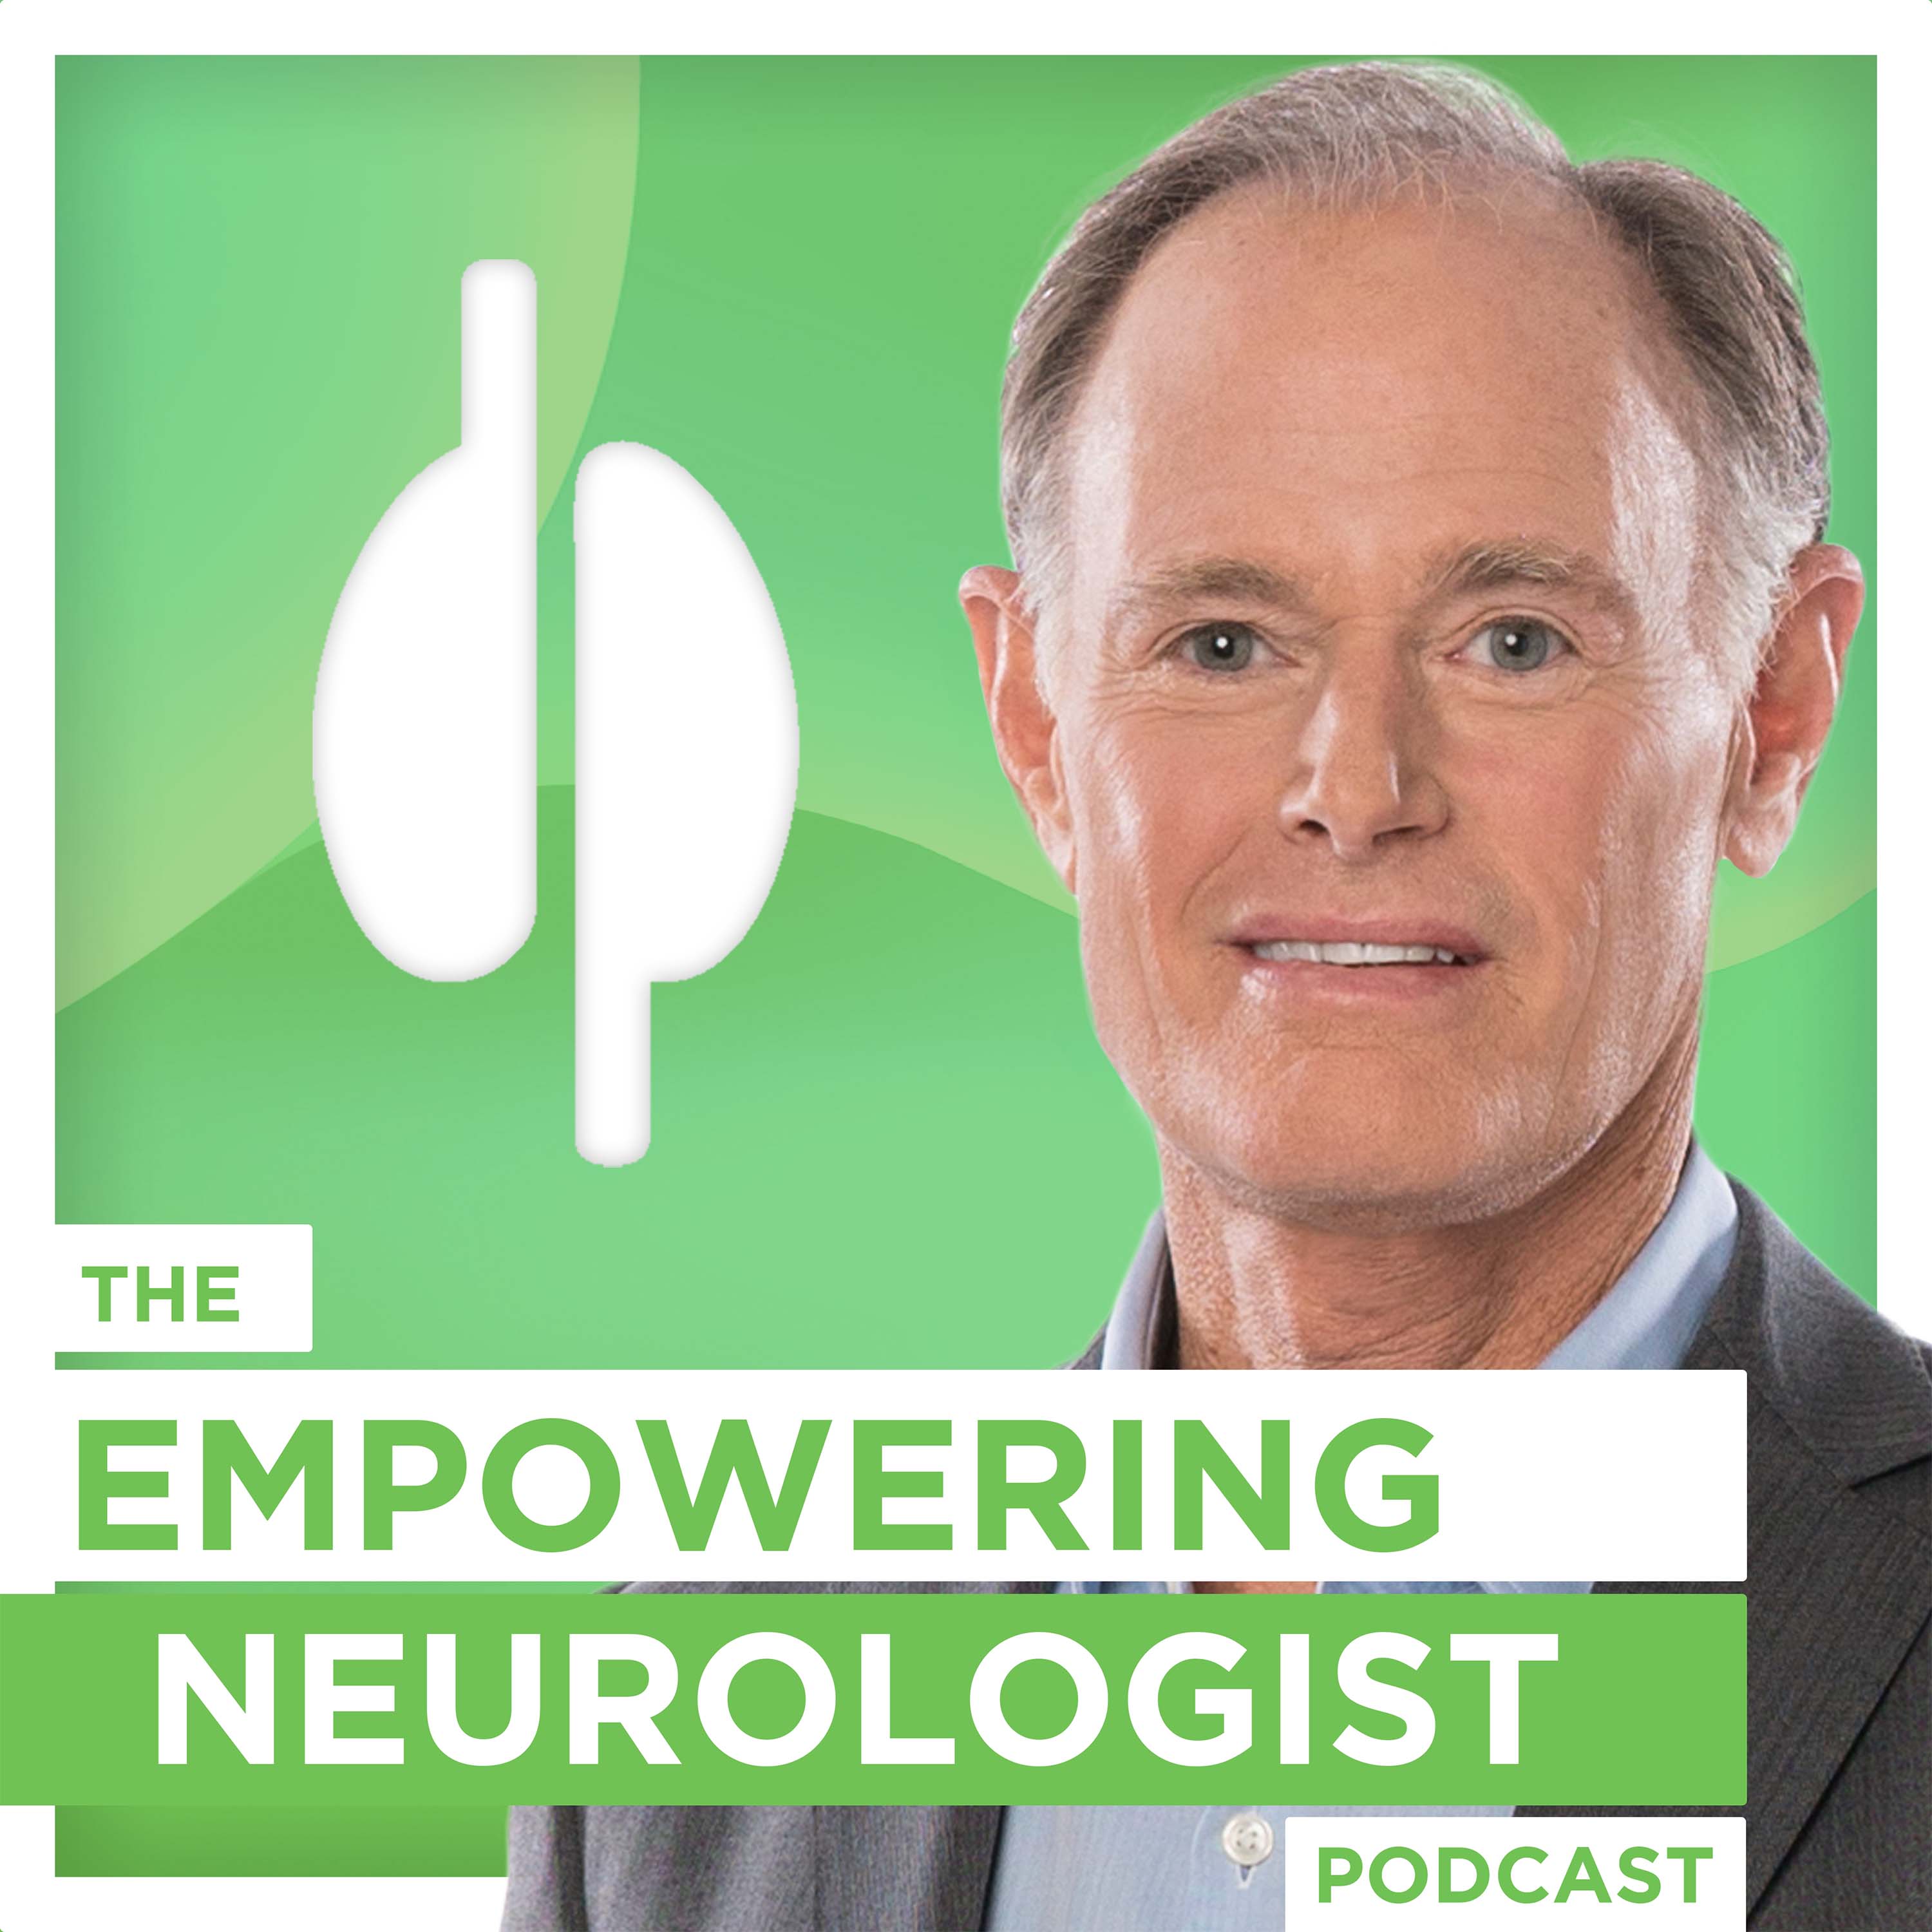 The Alarming Rise in Parkinson’s Disease with Dr. Ray Dorsey | The Empowering Neurologist EP. 167